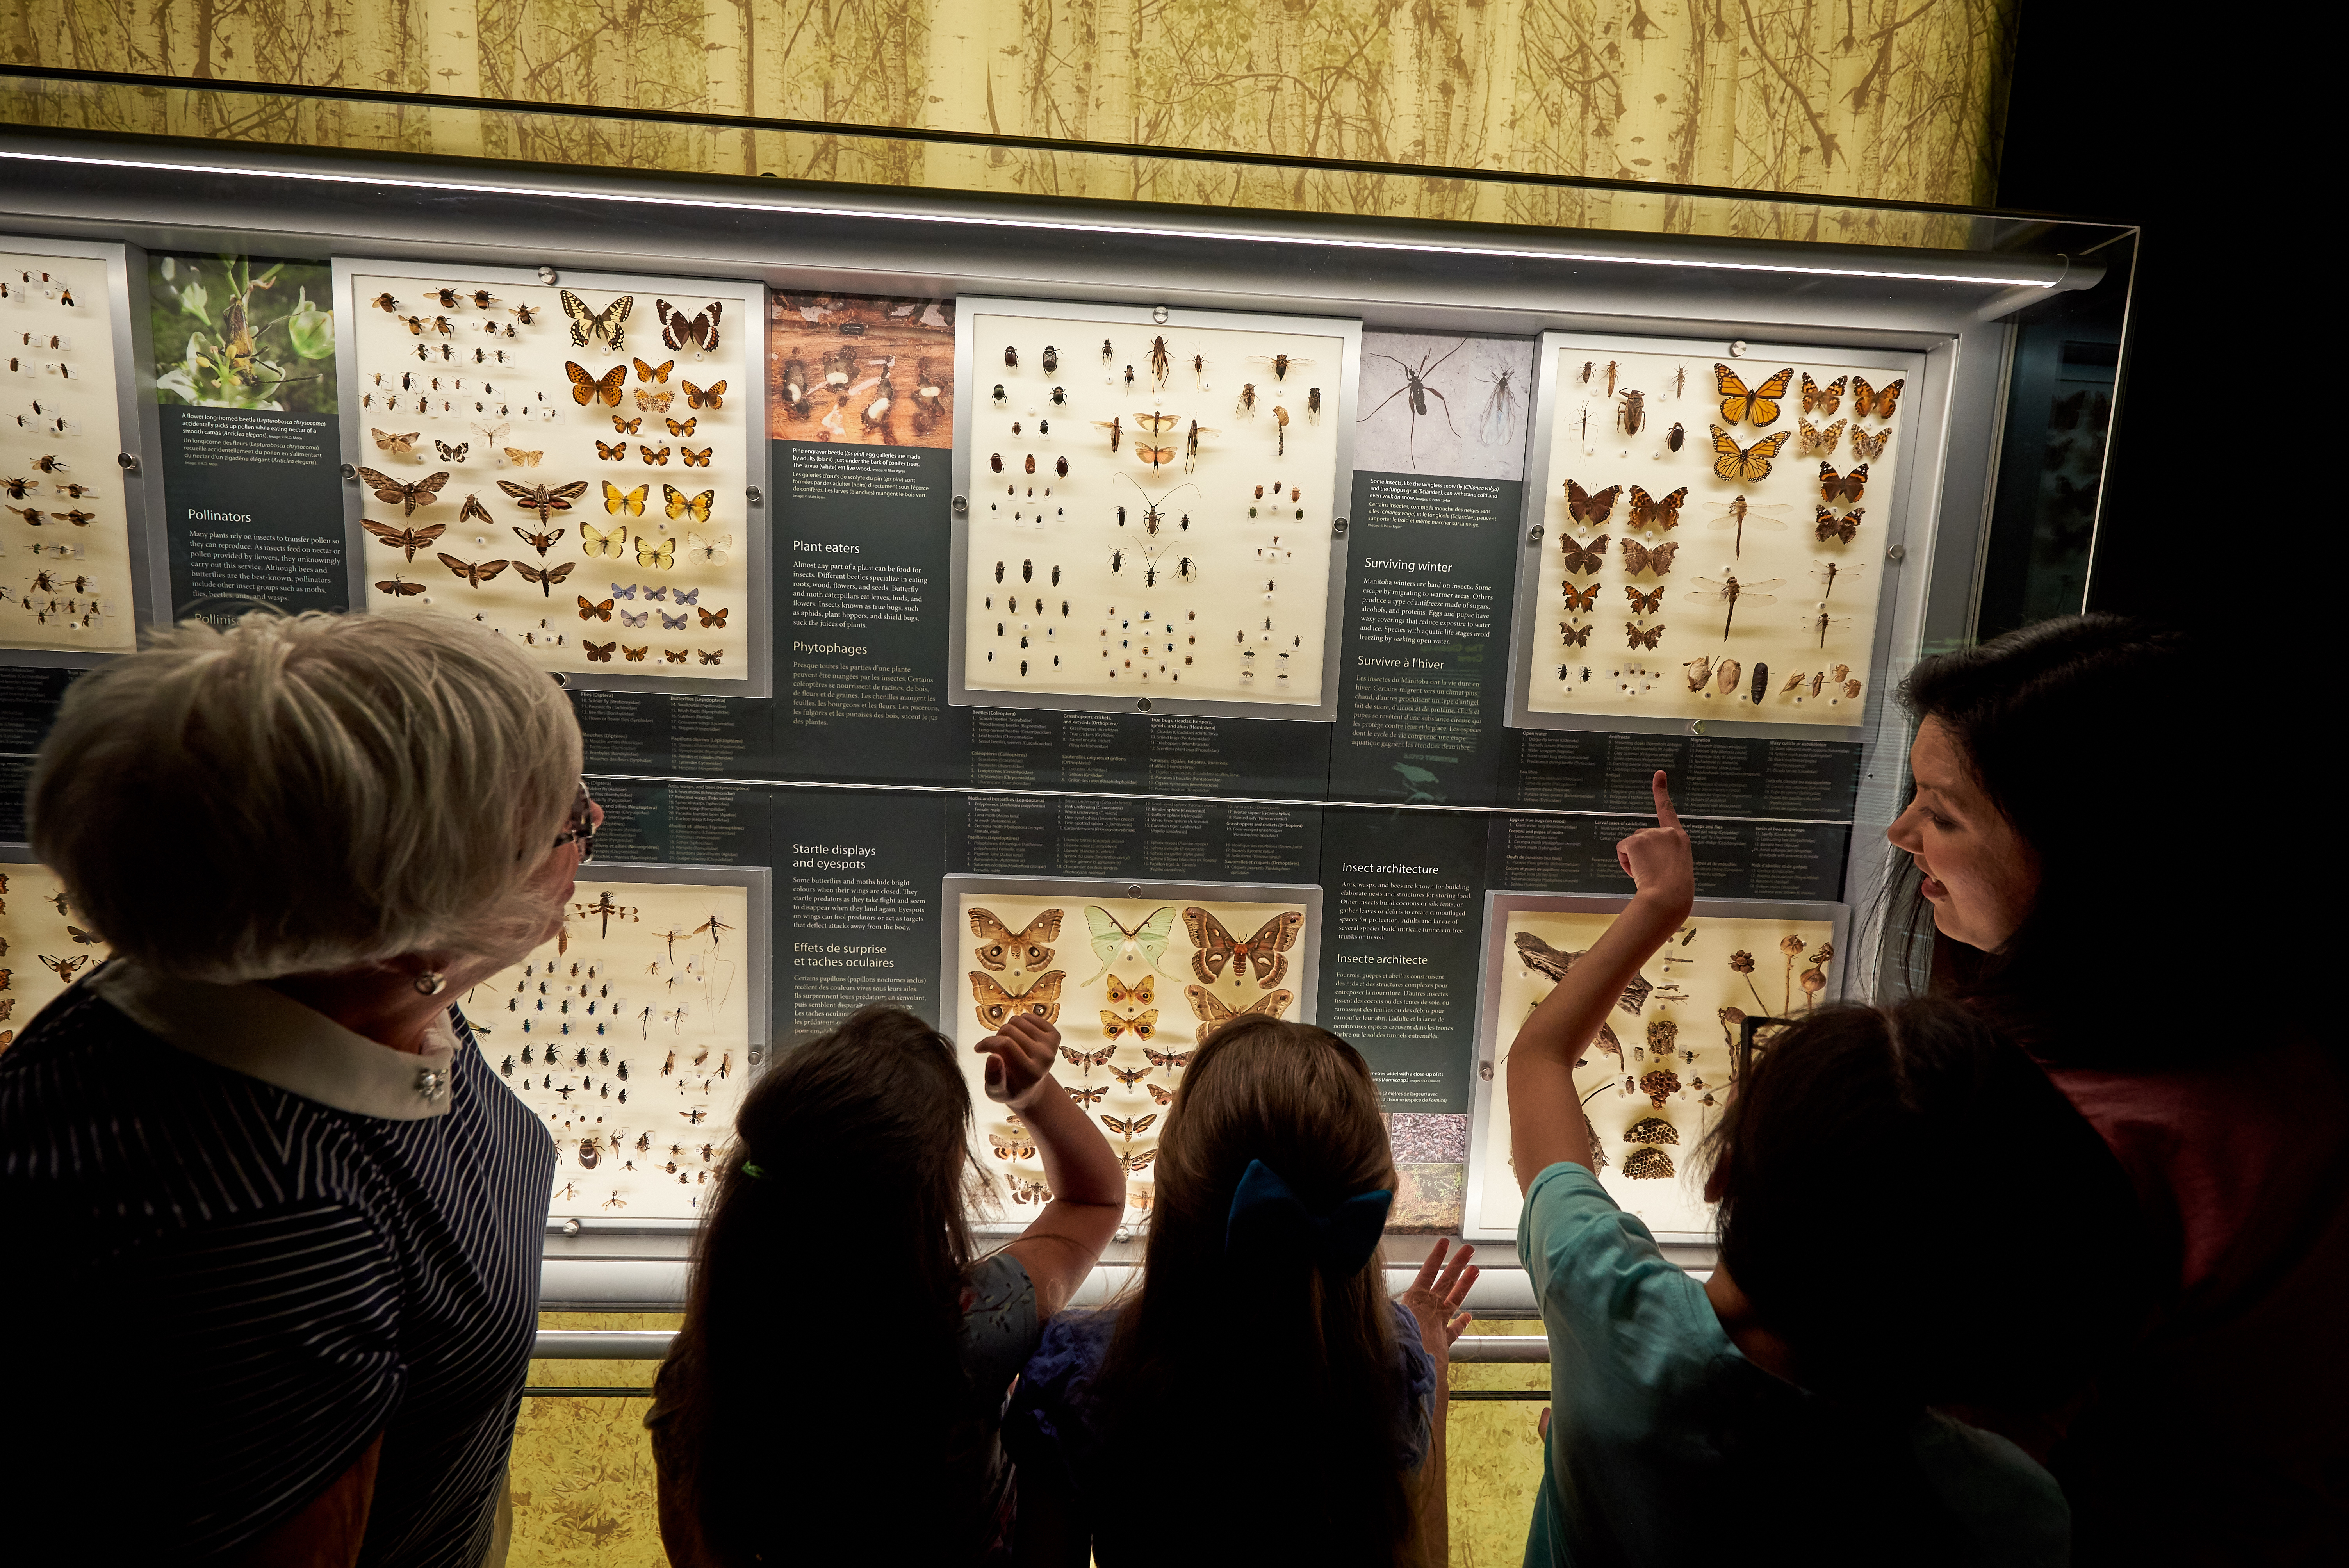 Two women and three children standing in front of a display of pinned insects, pointing at the exhibit.